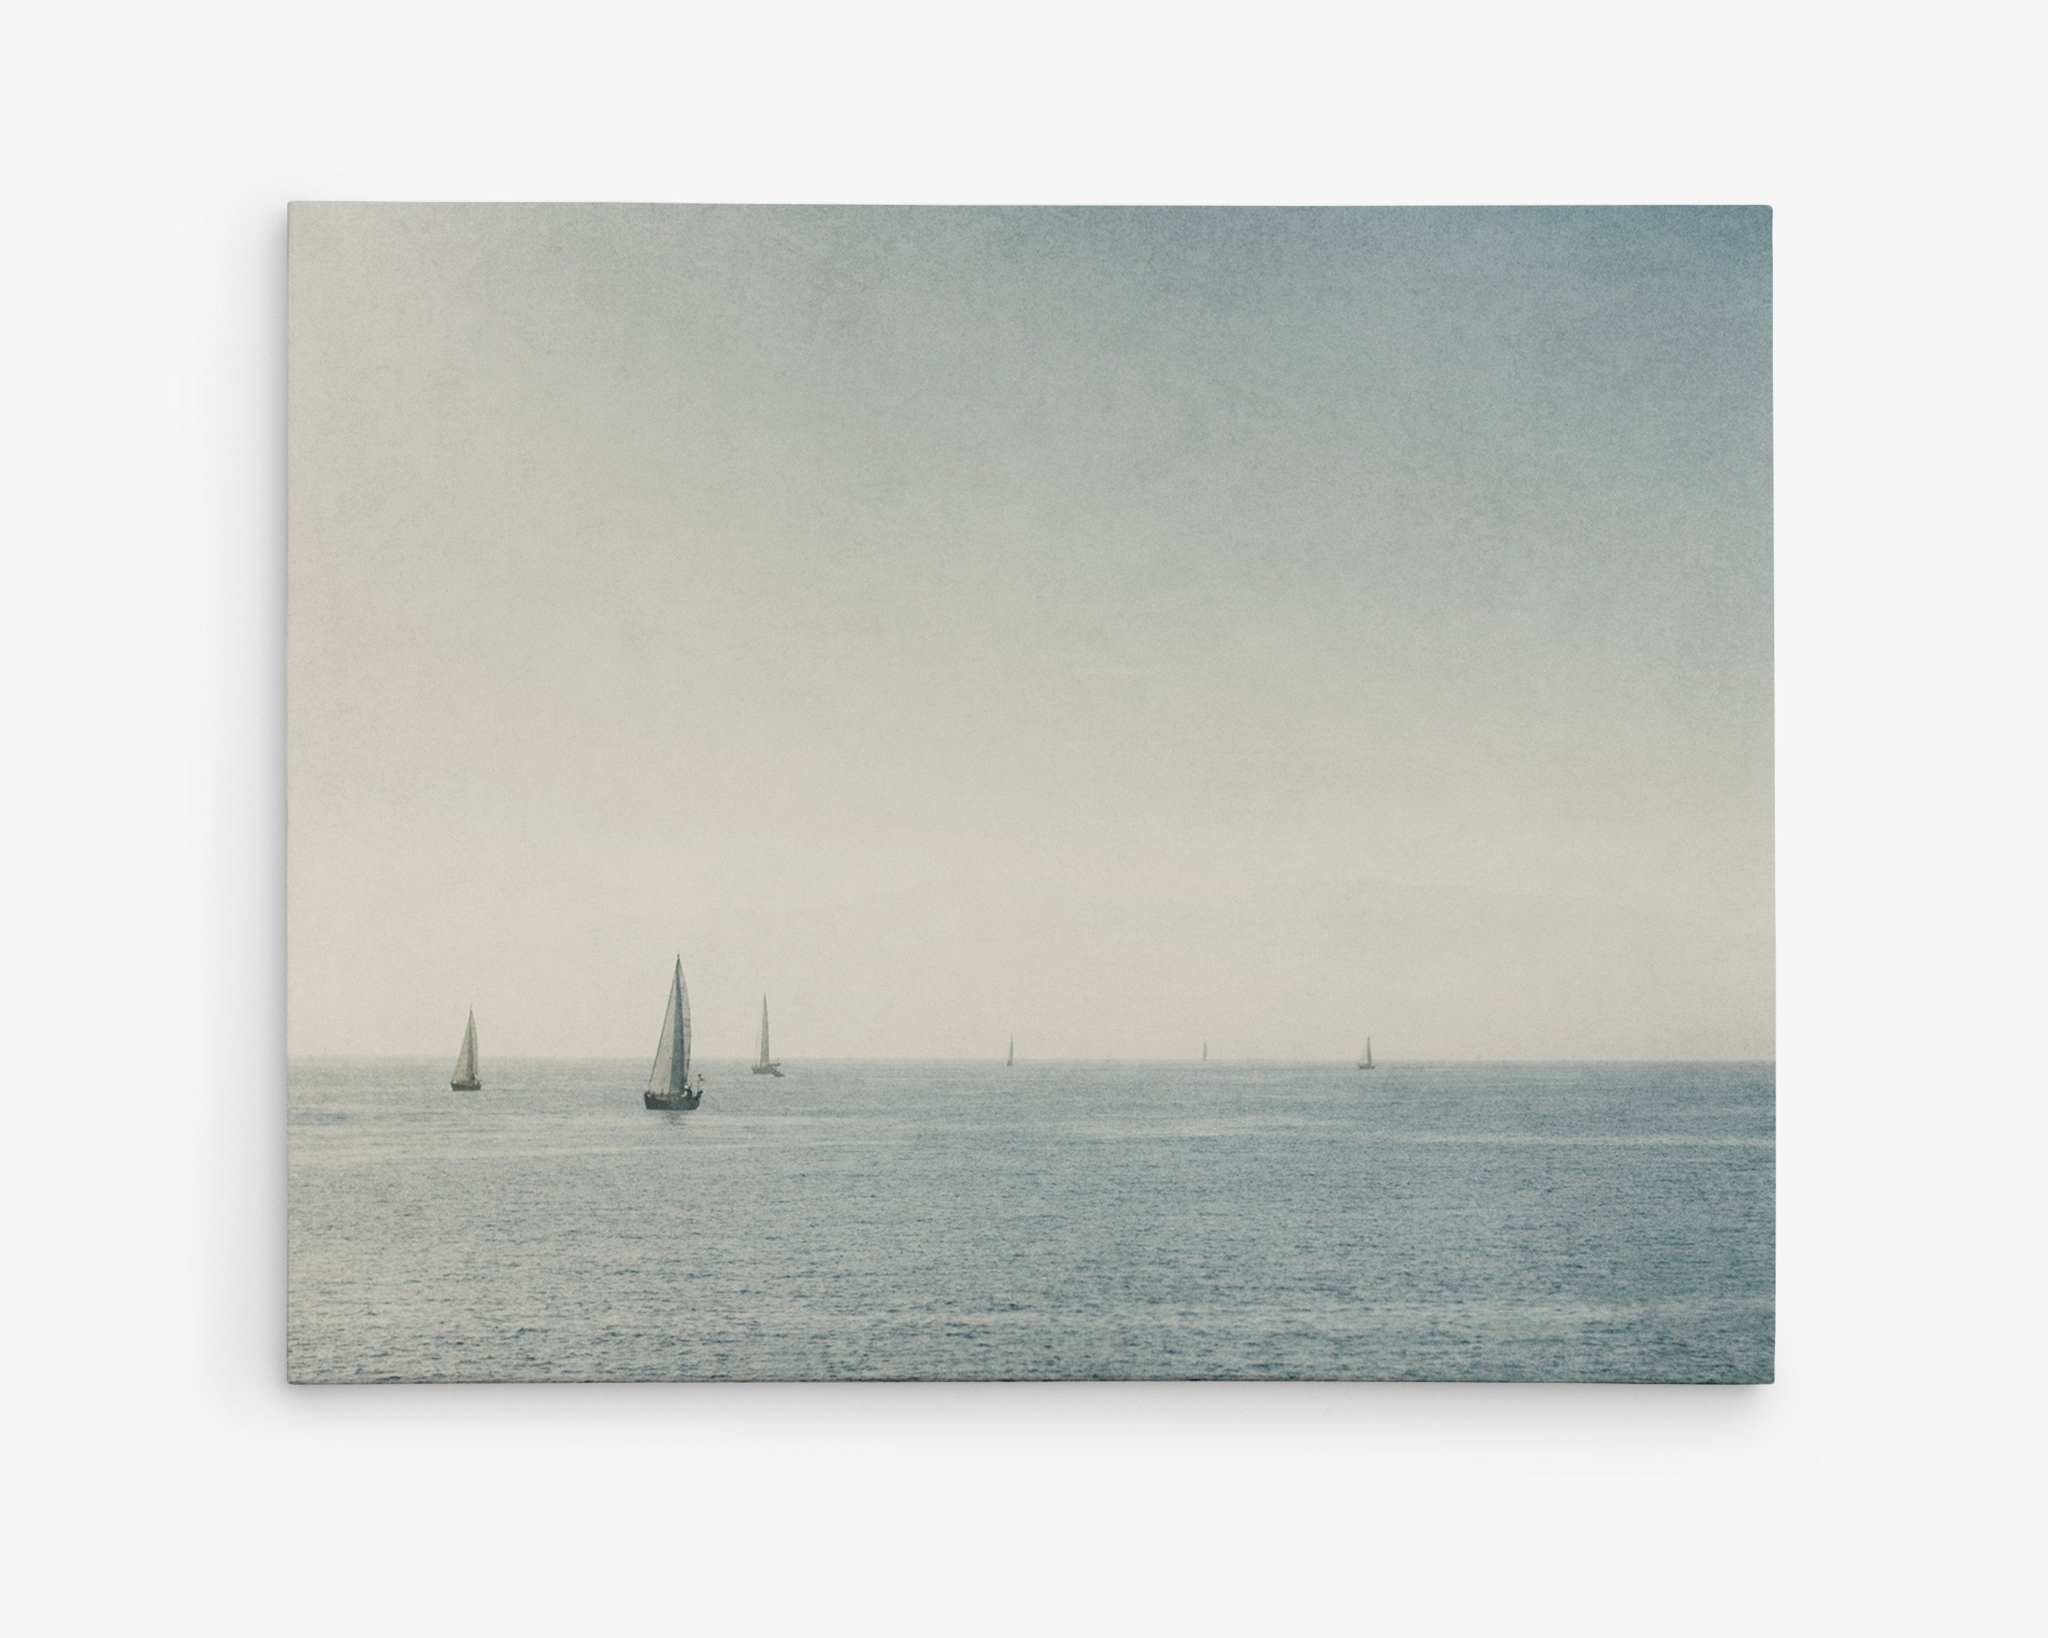 A serene ocean scene with several sailboats scattered across the calm water under a slightly overcast sky in Marina Del Rey. The horizon is faintly visible, blending seamlessly with the distant water surface. This Moody Nautical Seascape Canvas, 'Sail Boats Approaching' by Offley Green evokes a sense of tranquility and peacefulness.